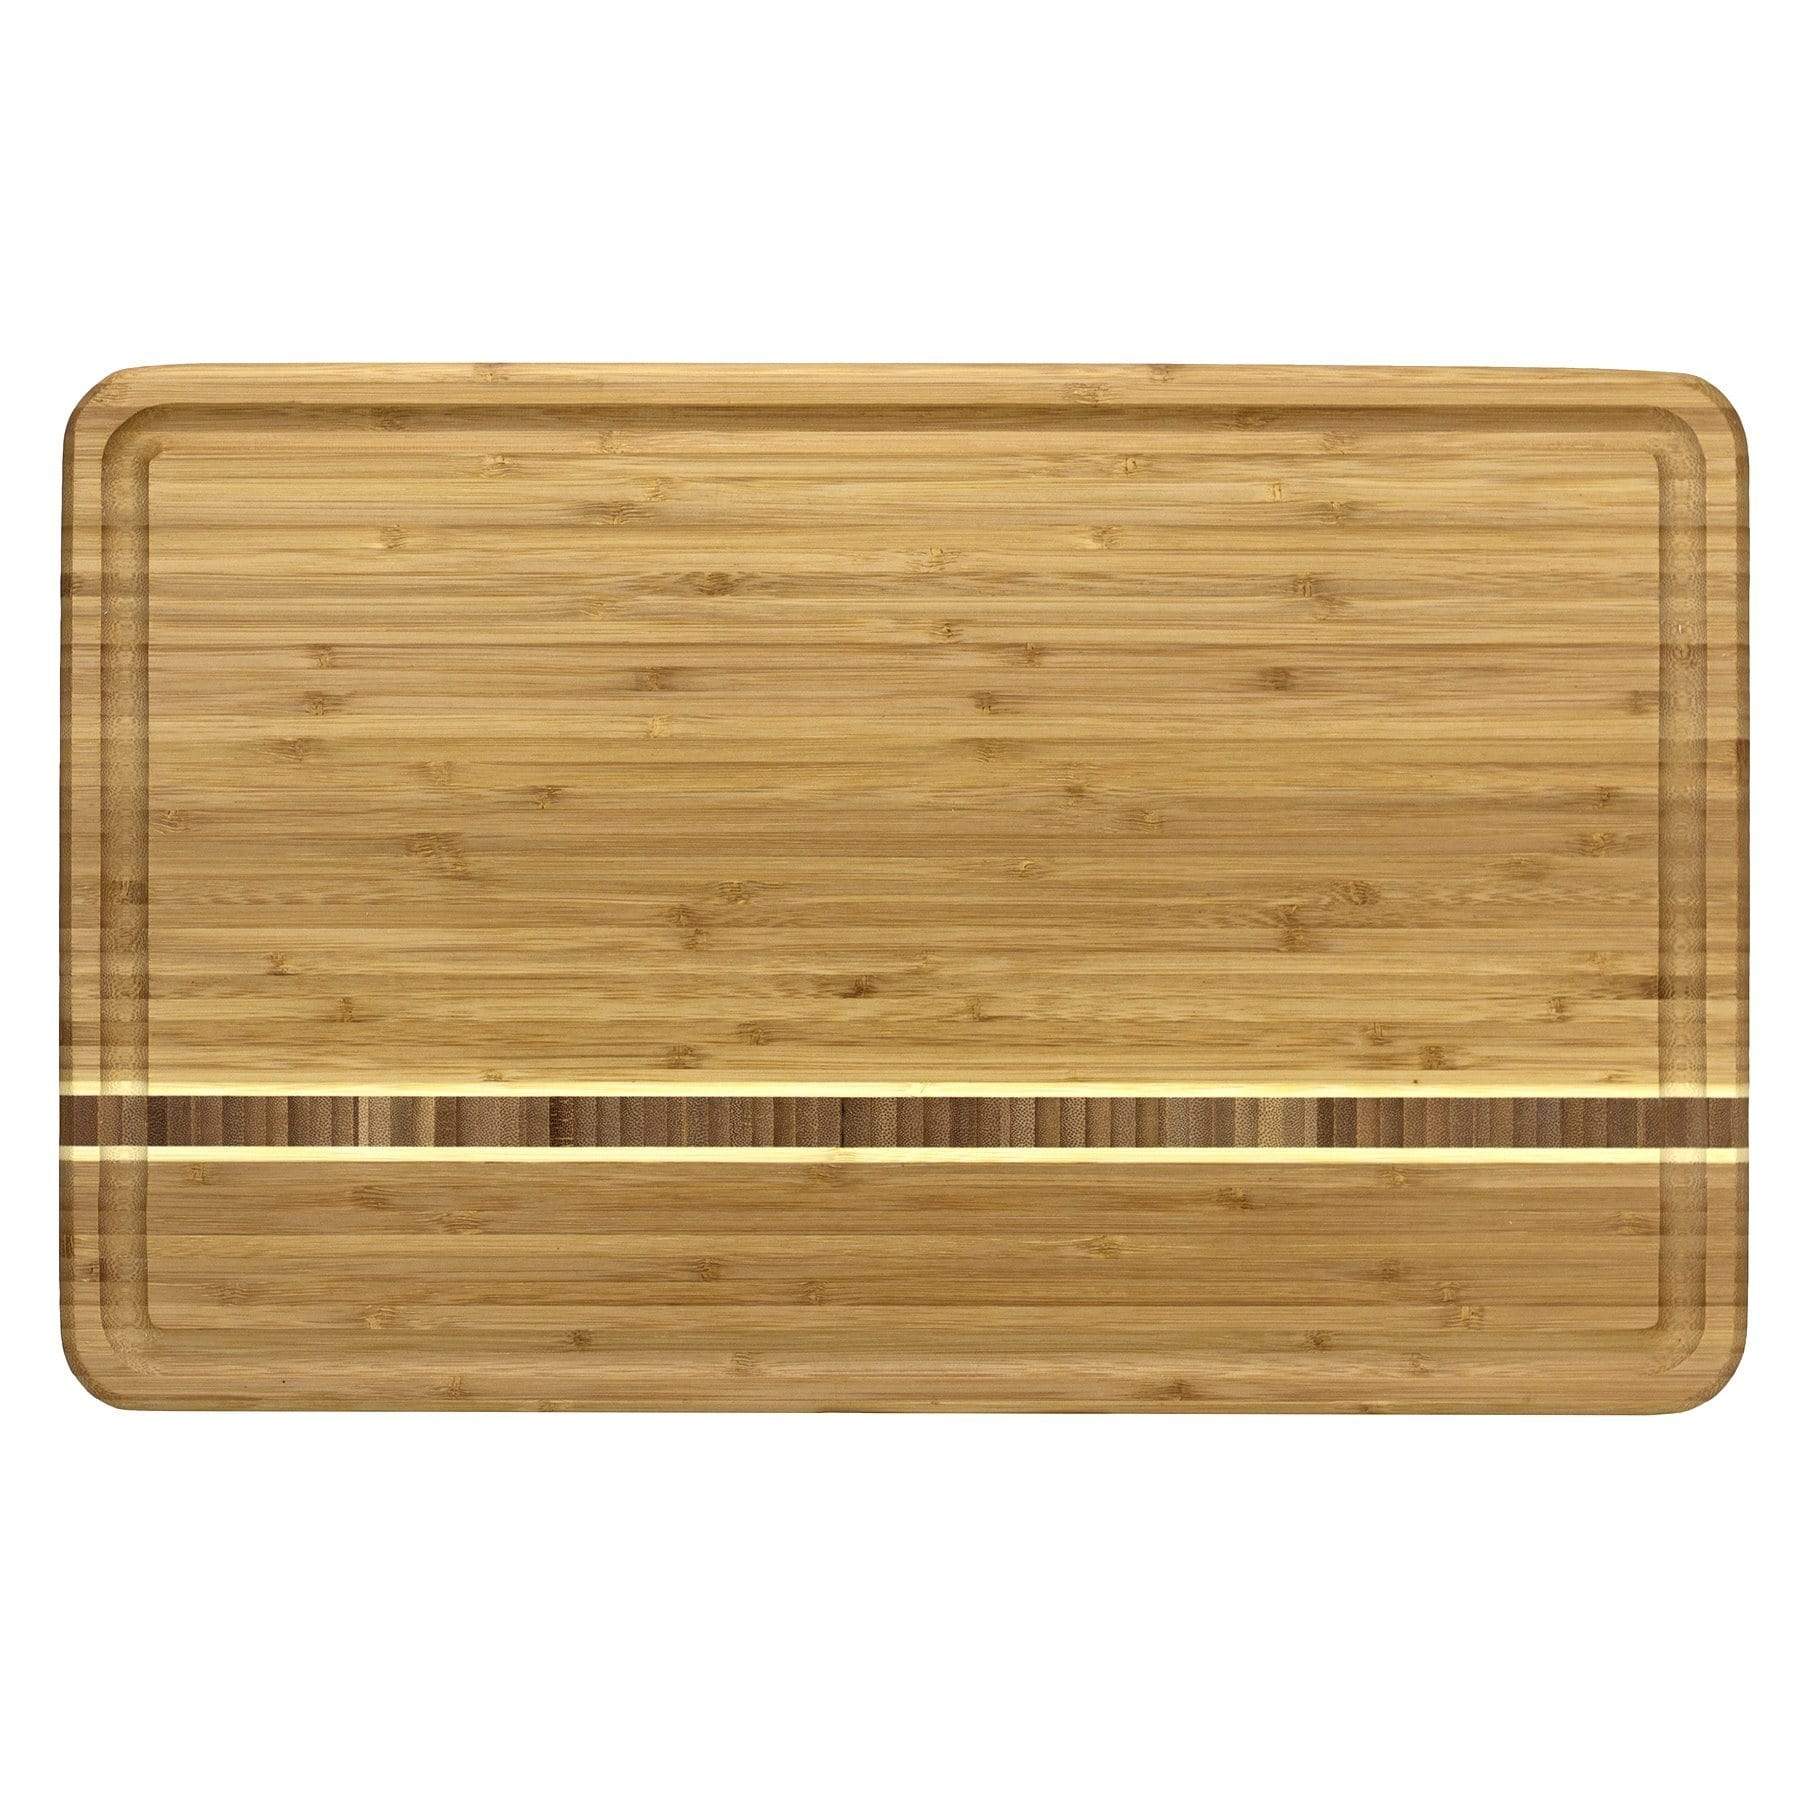 wood board on white background.